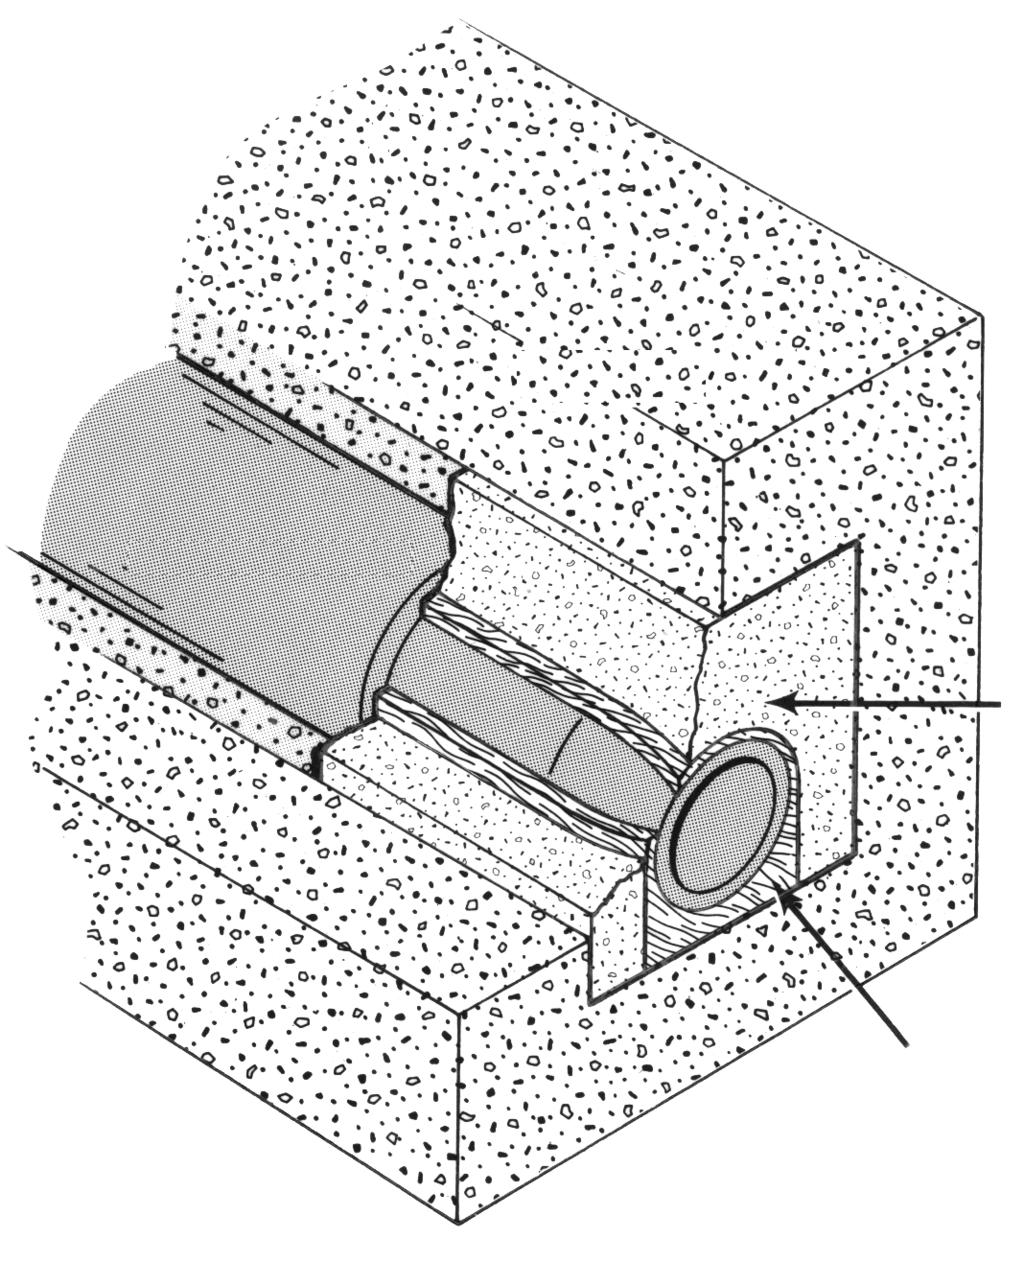 Figure 2 - Burner Mounting Alloy Burner Tube Lying On Floor Of Wall Opening Customer-supplied insulating block (insulating firebrick or castable refractory) surrounds nozzle.